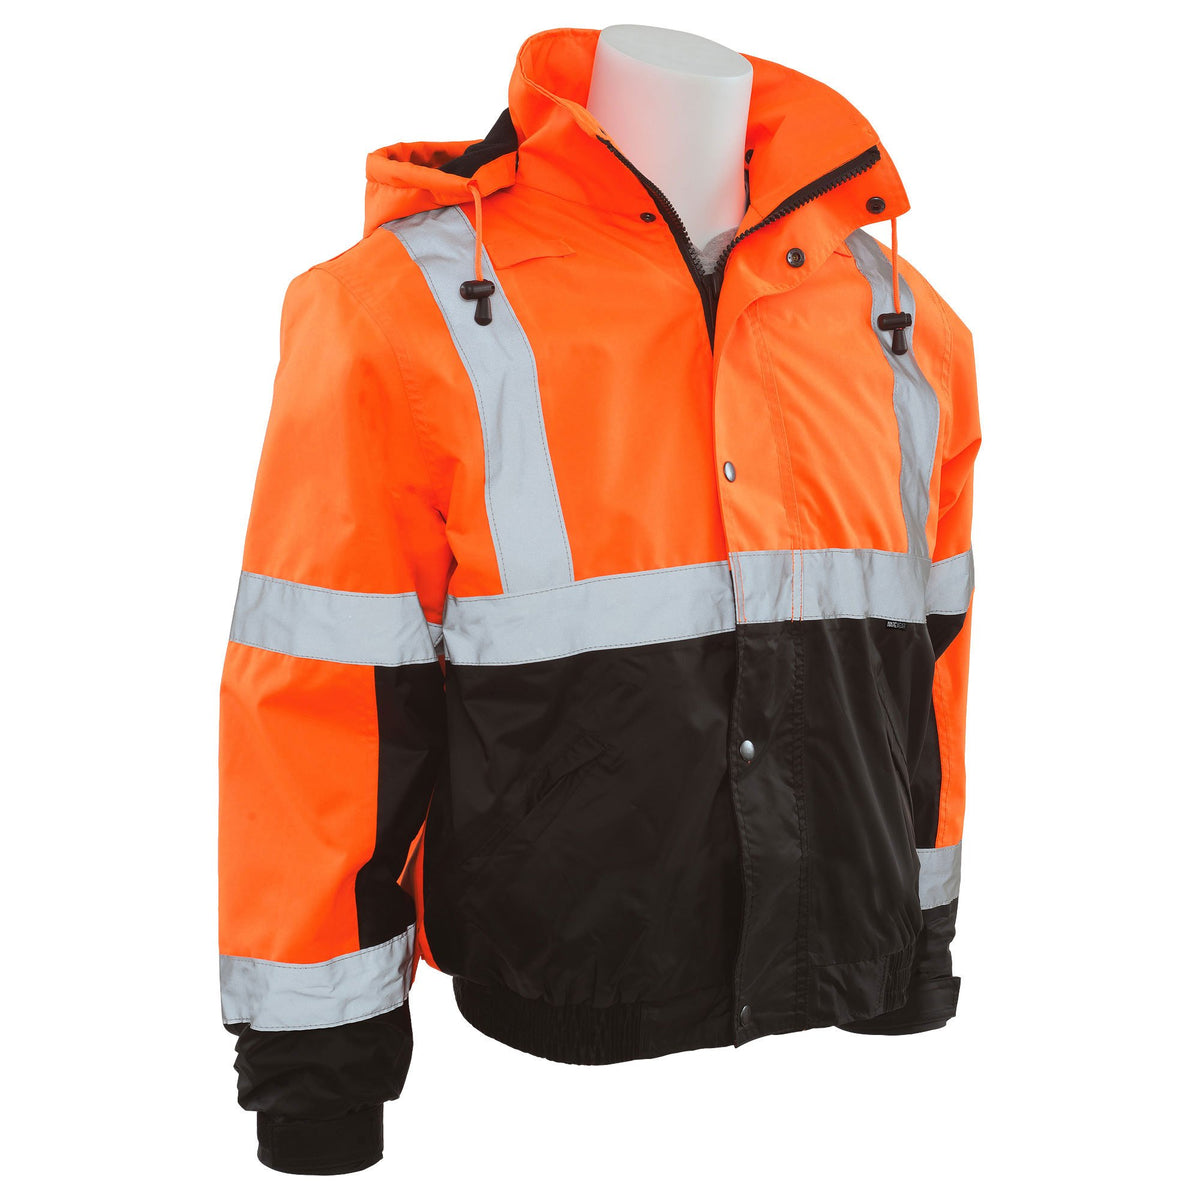 W106 Class 3 Bomber Jacket with Storm Flap and Hood